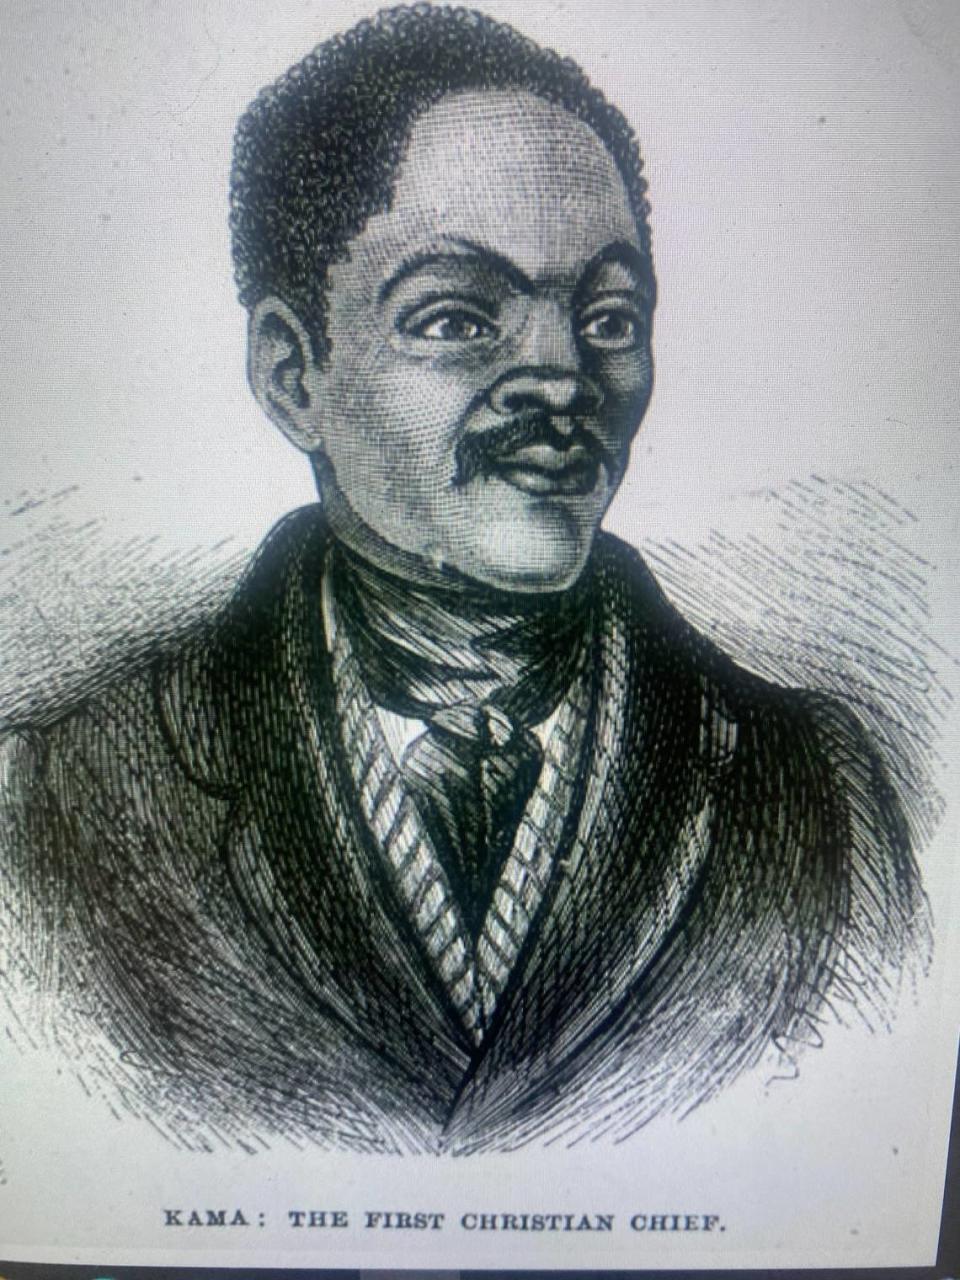 William Kama, chief of a branch of the Xhosa people in South Africa, who was the first to accept Christianity when approached by Methodist missionaries.